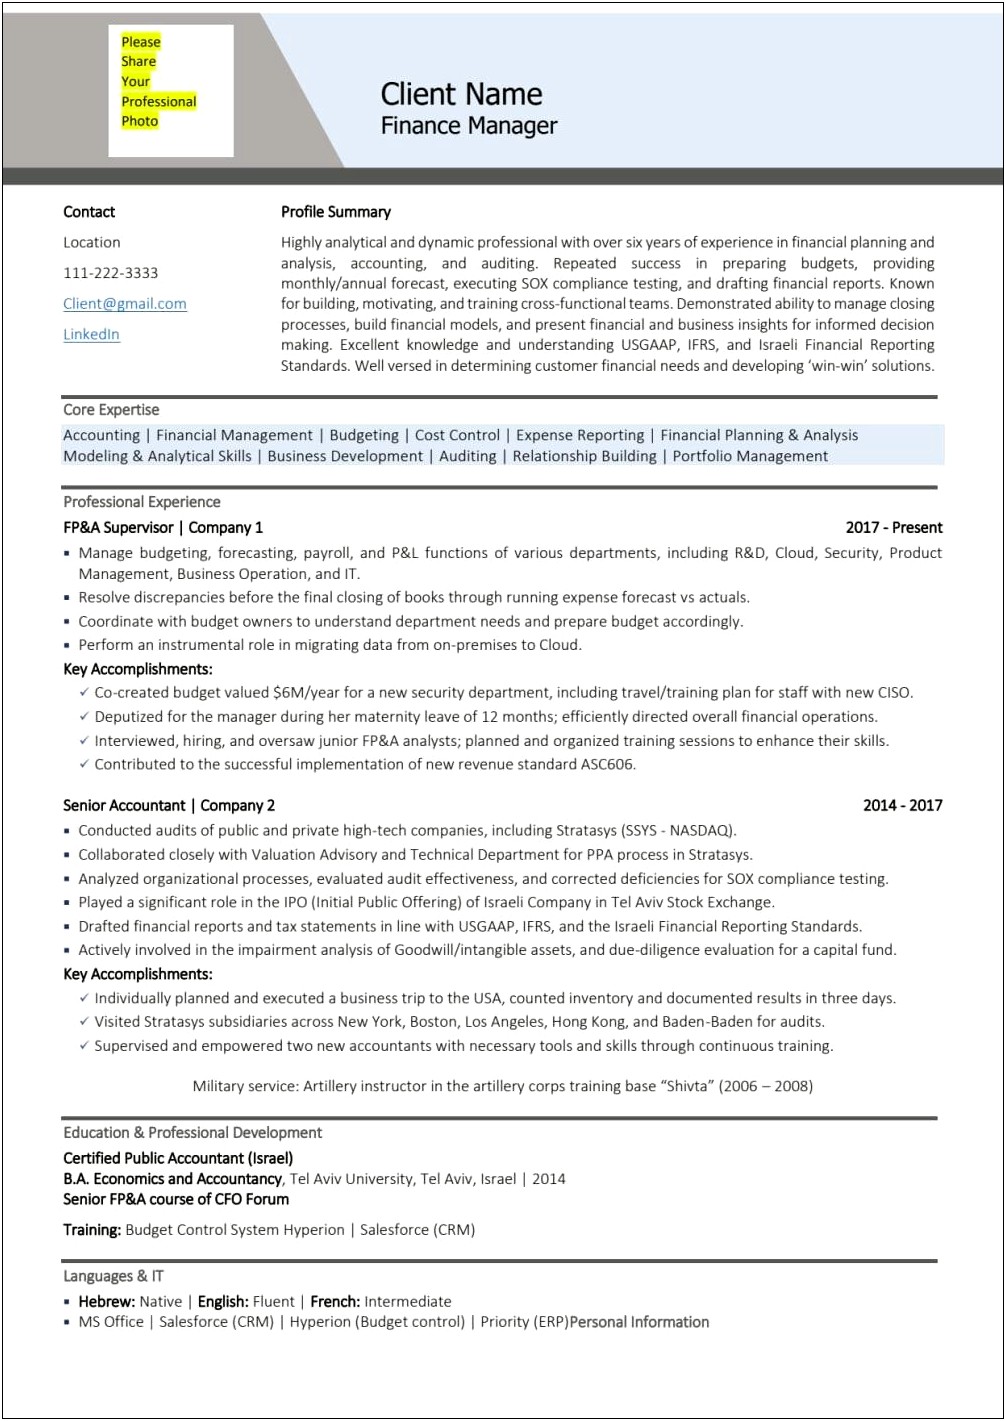 Upload Cover Letter And Resume To Linkedin